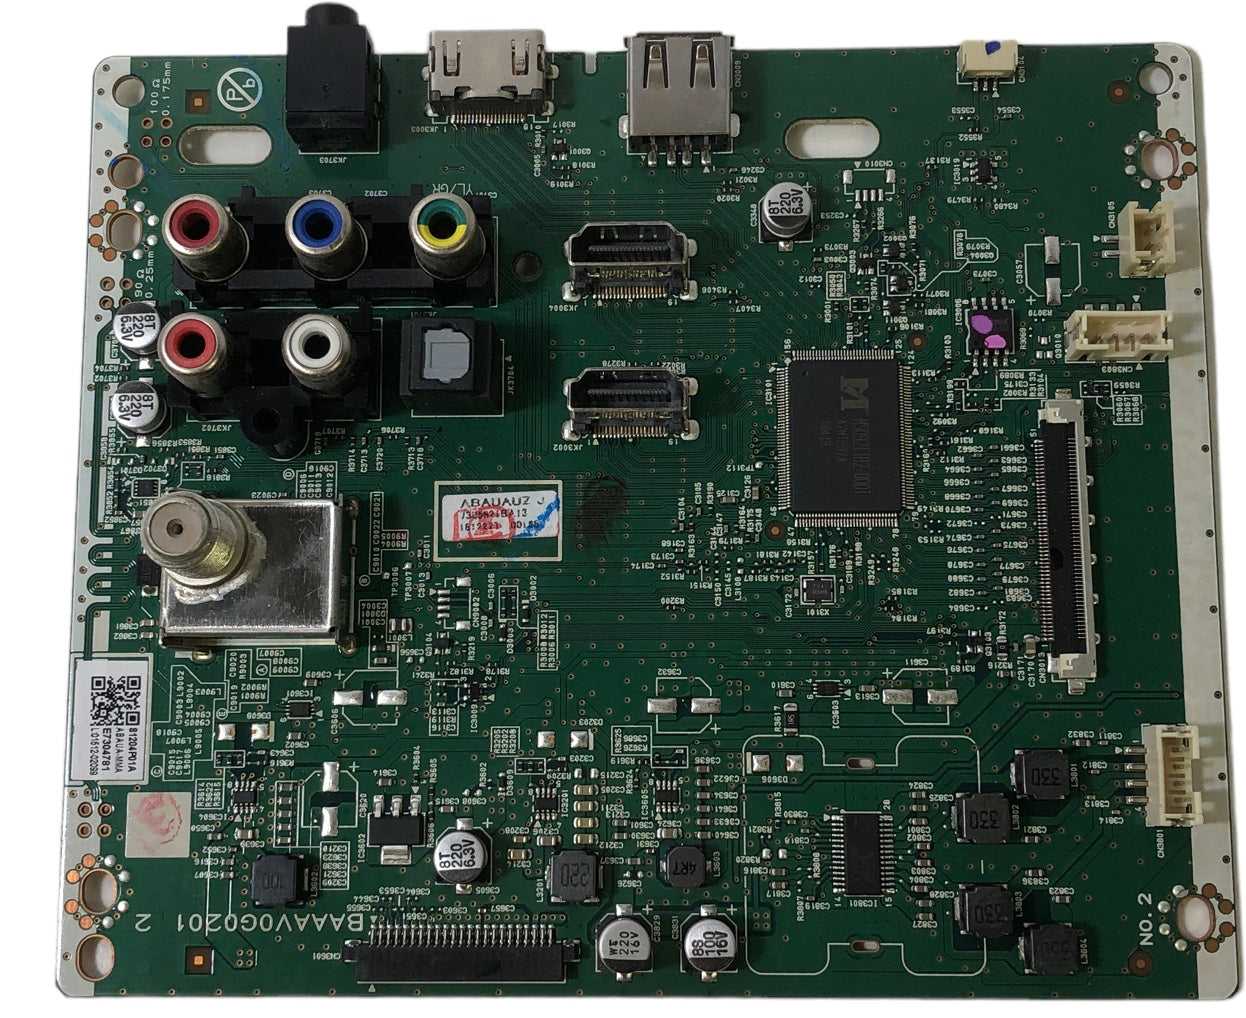 Sanyo ABAUAMMA-001 Main Board for FW50D48F (DS1 serial)